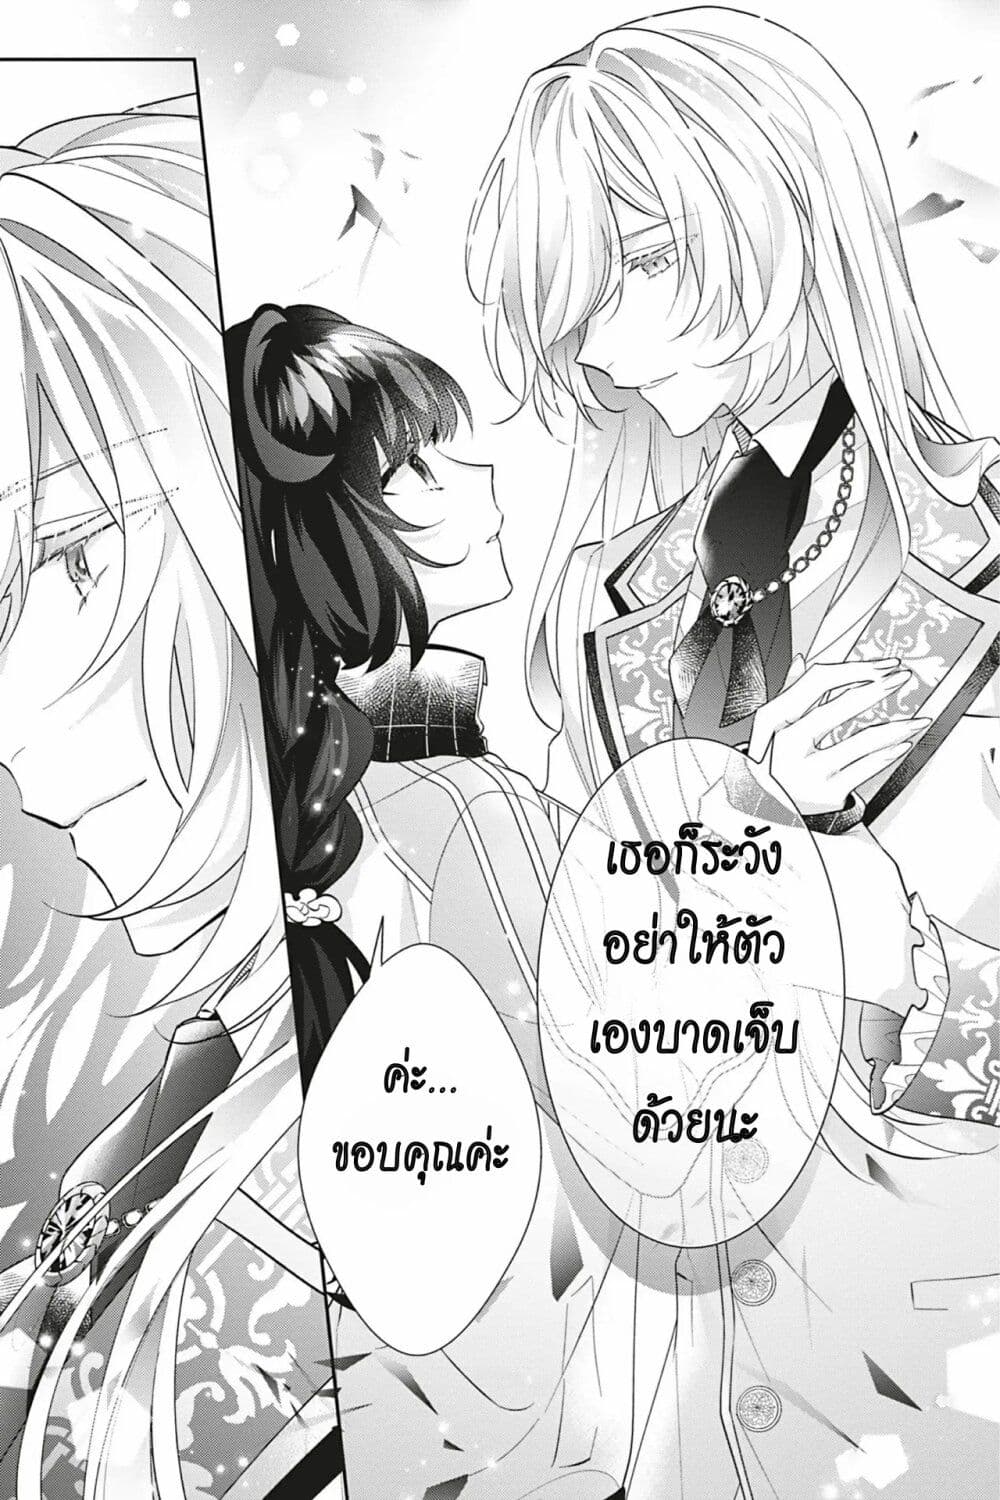 I Was Reincarnated as the Villainess in an Otome Game but the Boys Love Me Anyway! เกิดใหม่เป็นนางร้าย แต่เป้าหมายการจีบสุดจะไม่ปกติ !! 16-16